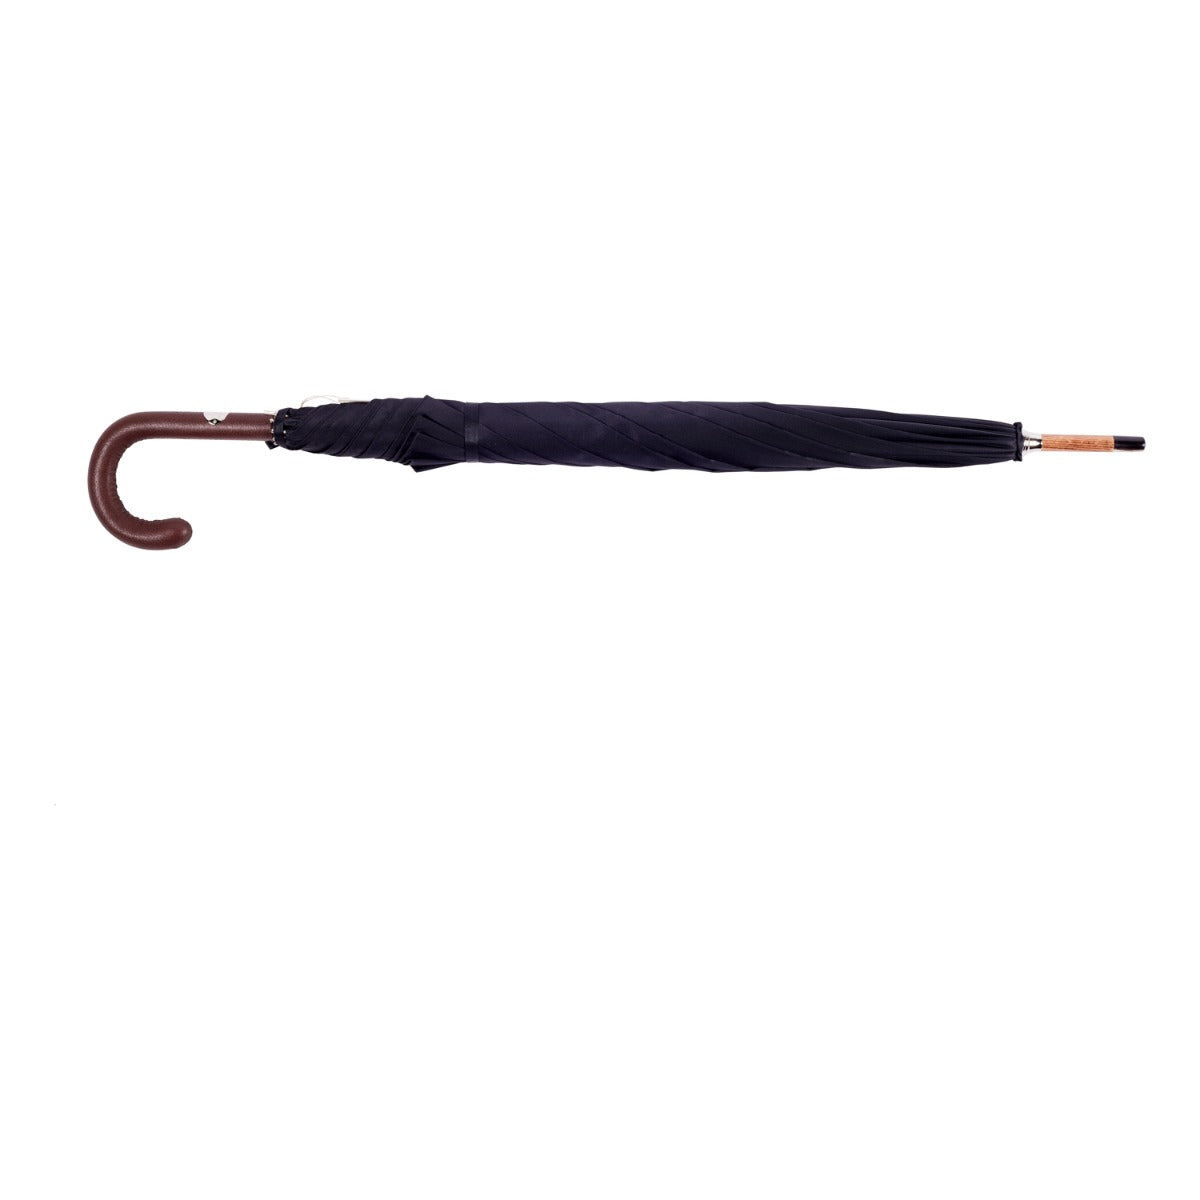 A Brown Pigskin Solid Stick Umbrella with a Black Canopy and a pigskin handle on a white background in Milan, Italy by KirbyAllison.com.